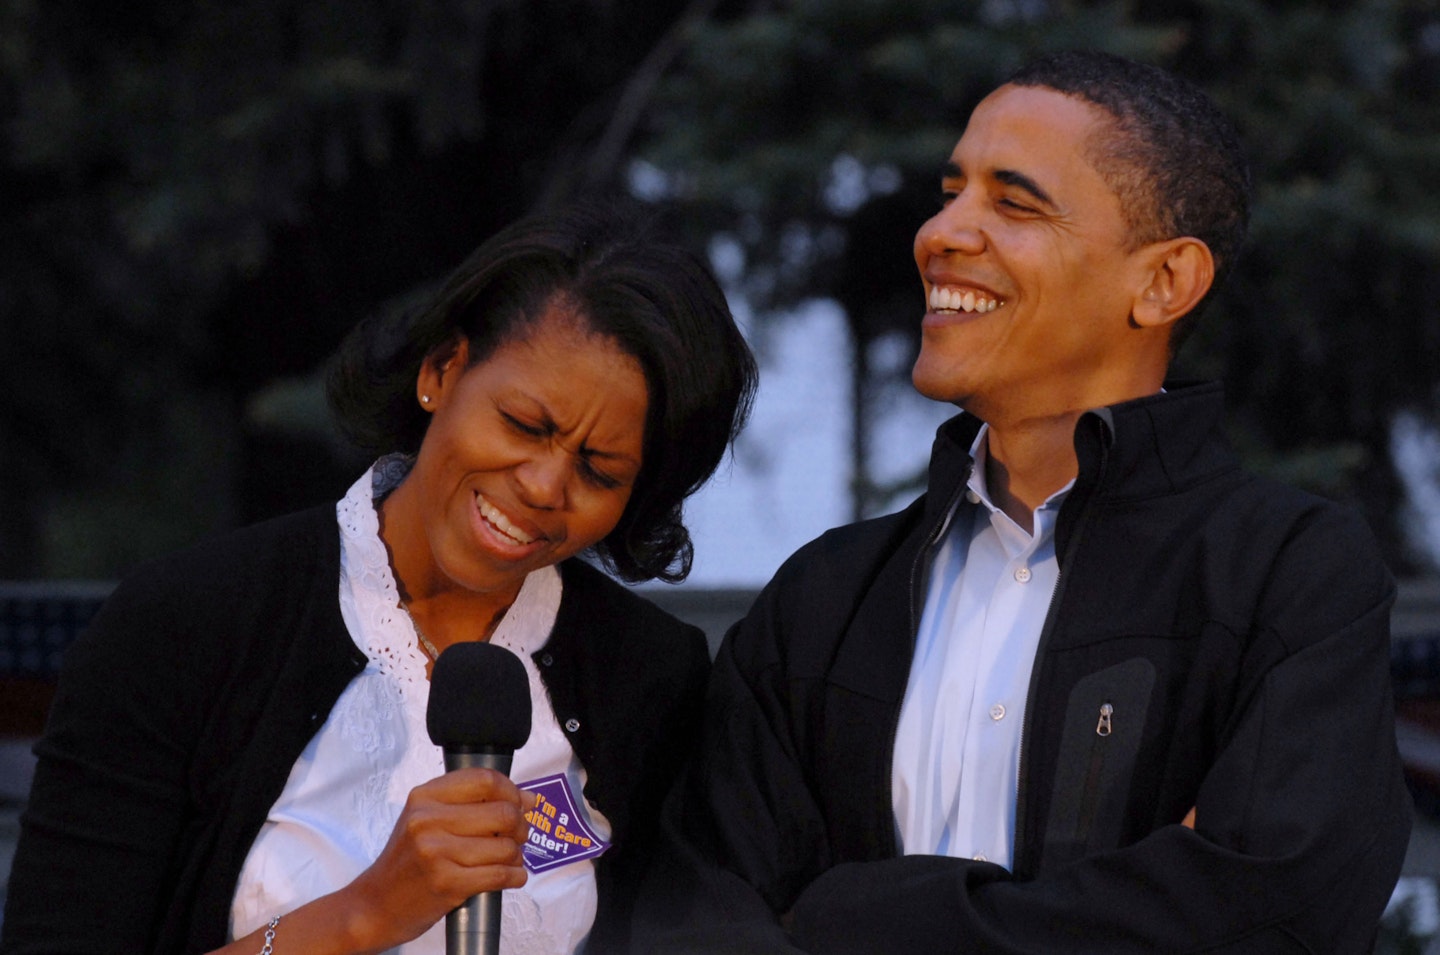 Barack Obama and his wife Michelle laugh together at an "ice cream social" campaign event at Veterans Memorial Park in Berlin, New Hampshire, on Sunday, May 27, 2007.